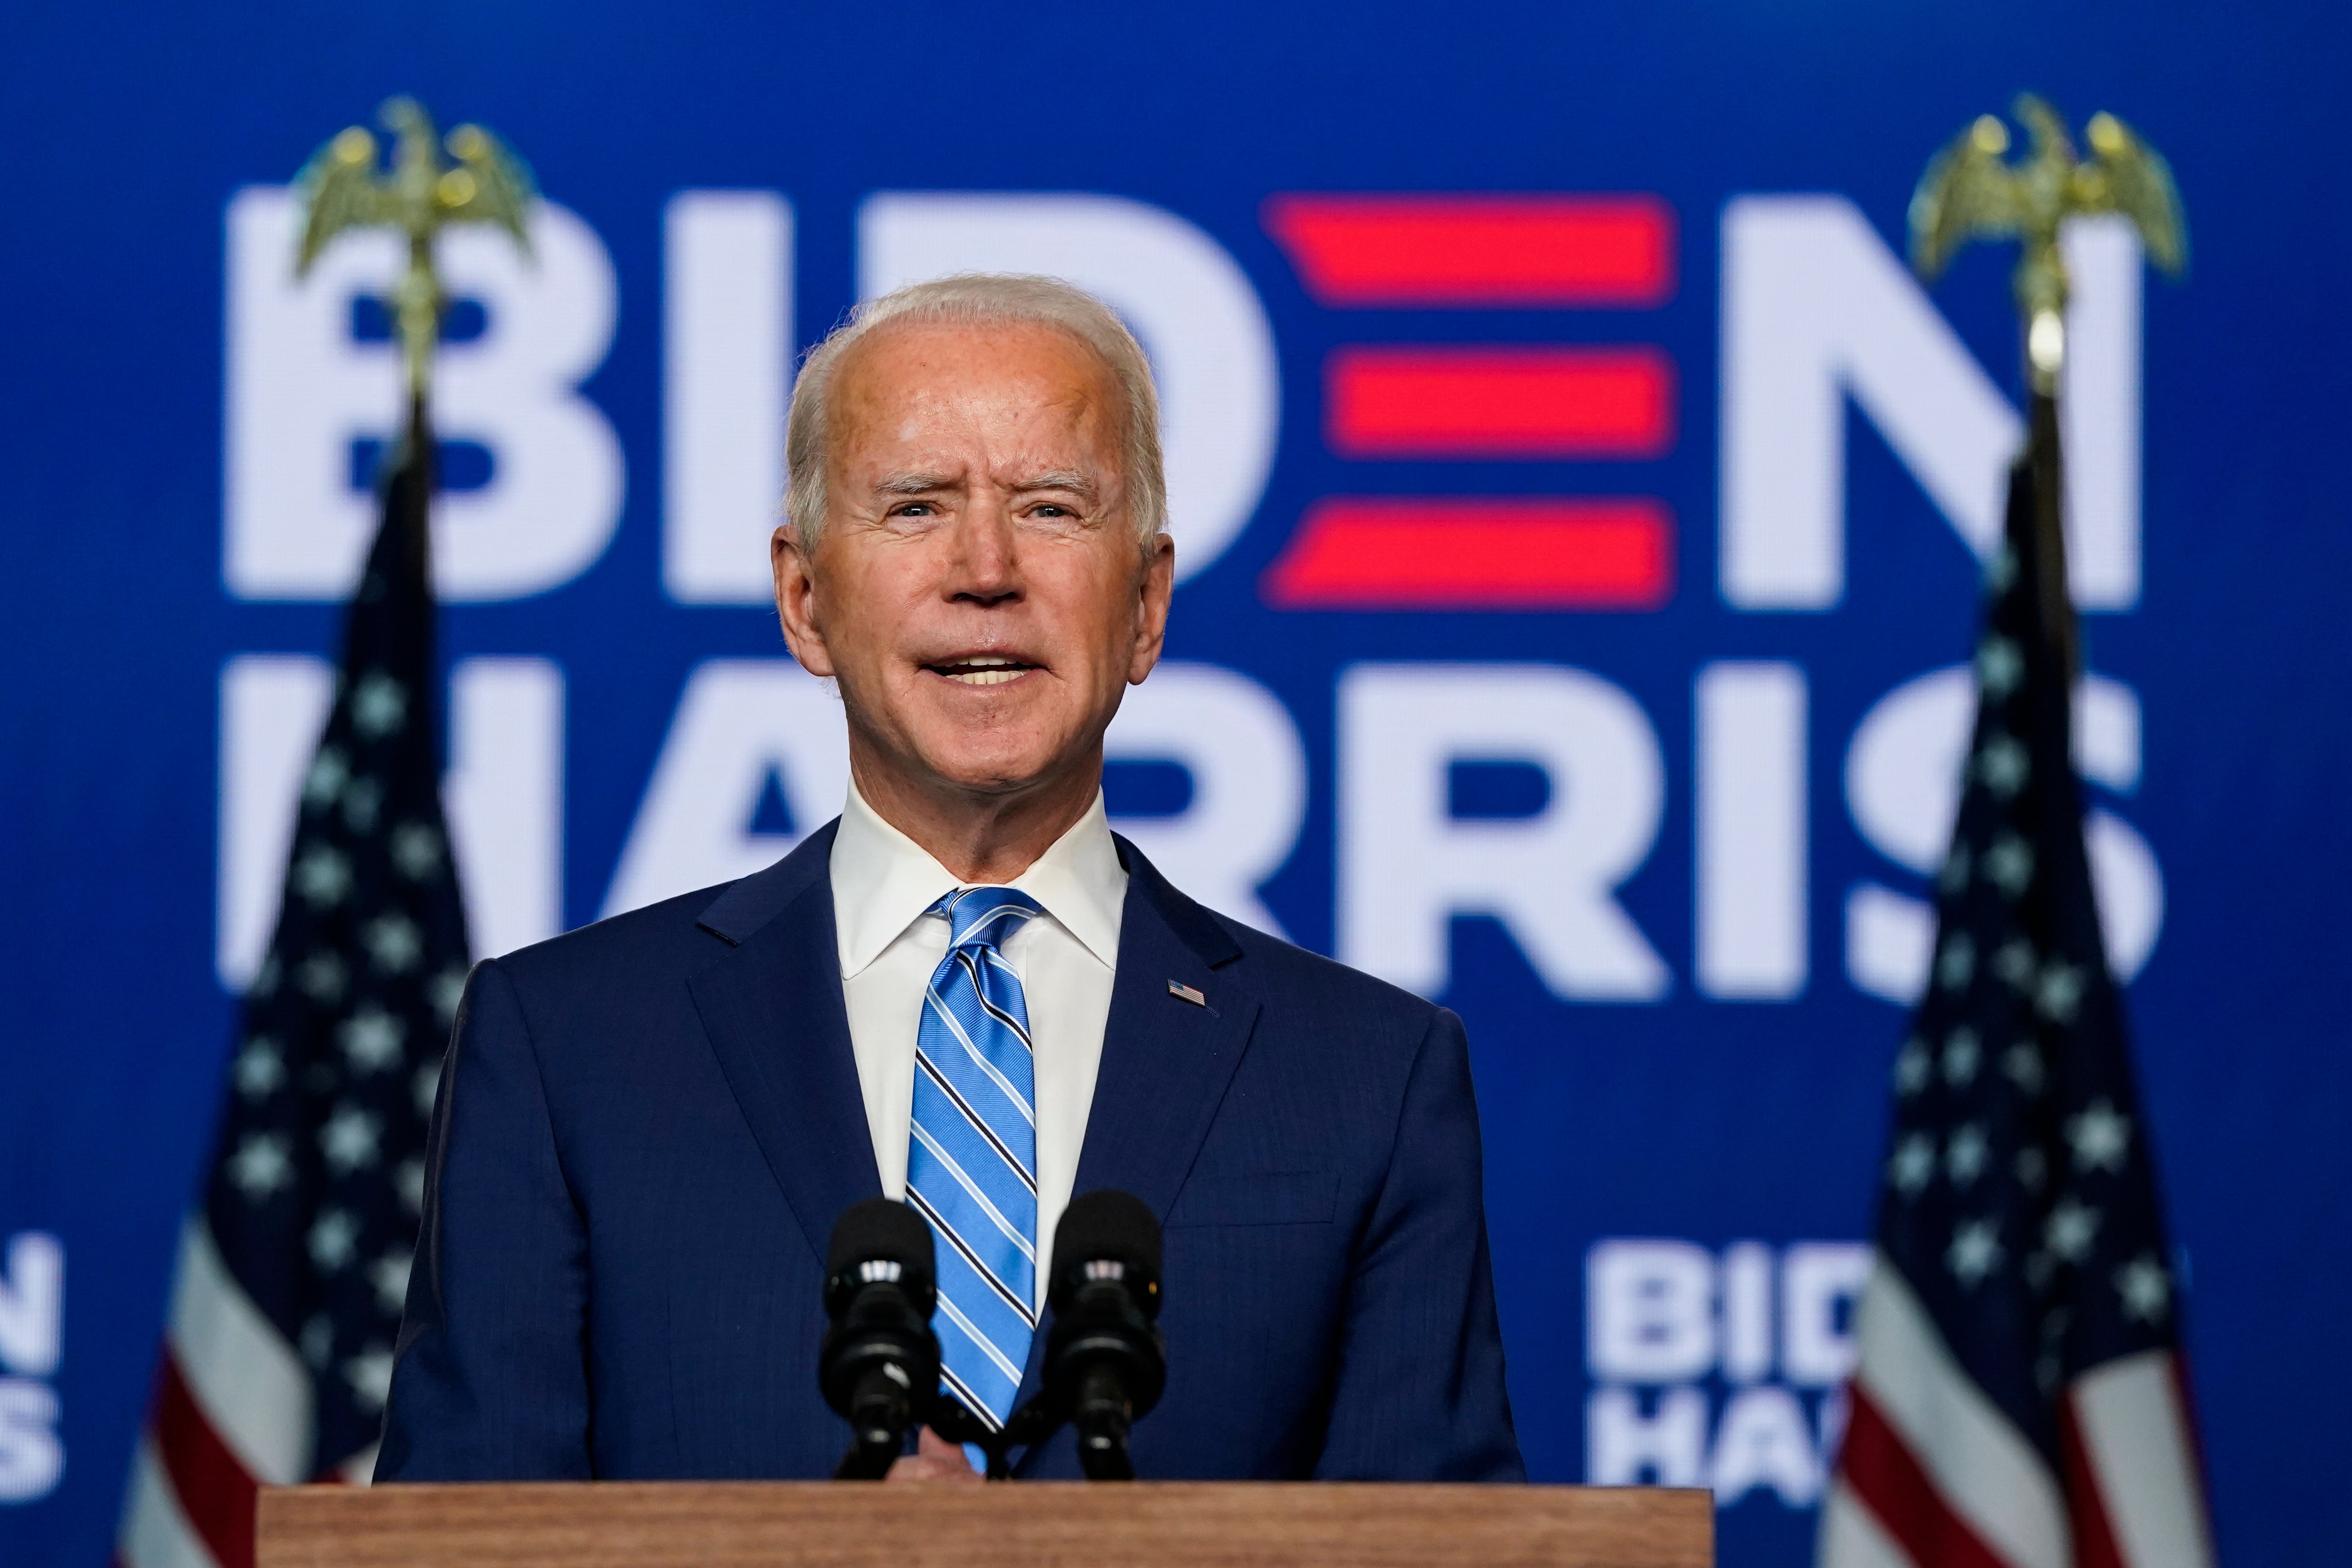 Joe Biden has called on Americans to put the ‘harsh rhetoric’ of the campaign behind them